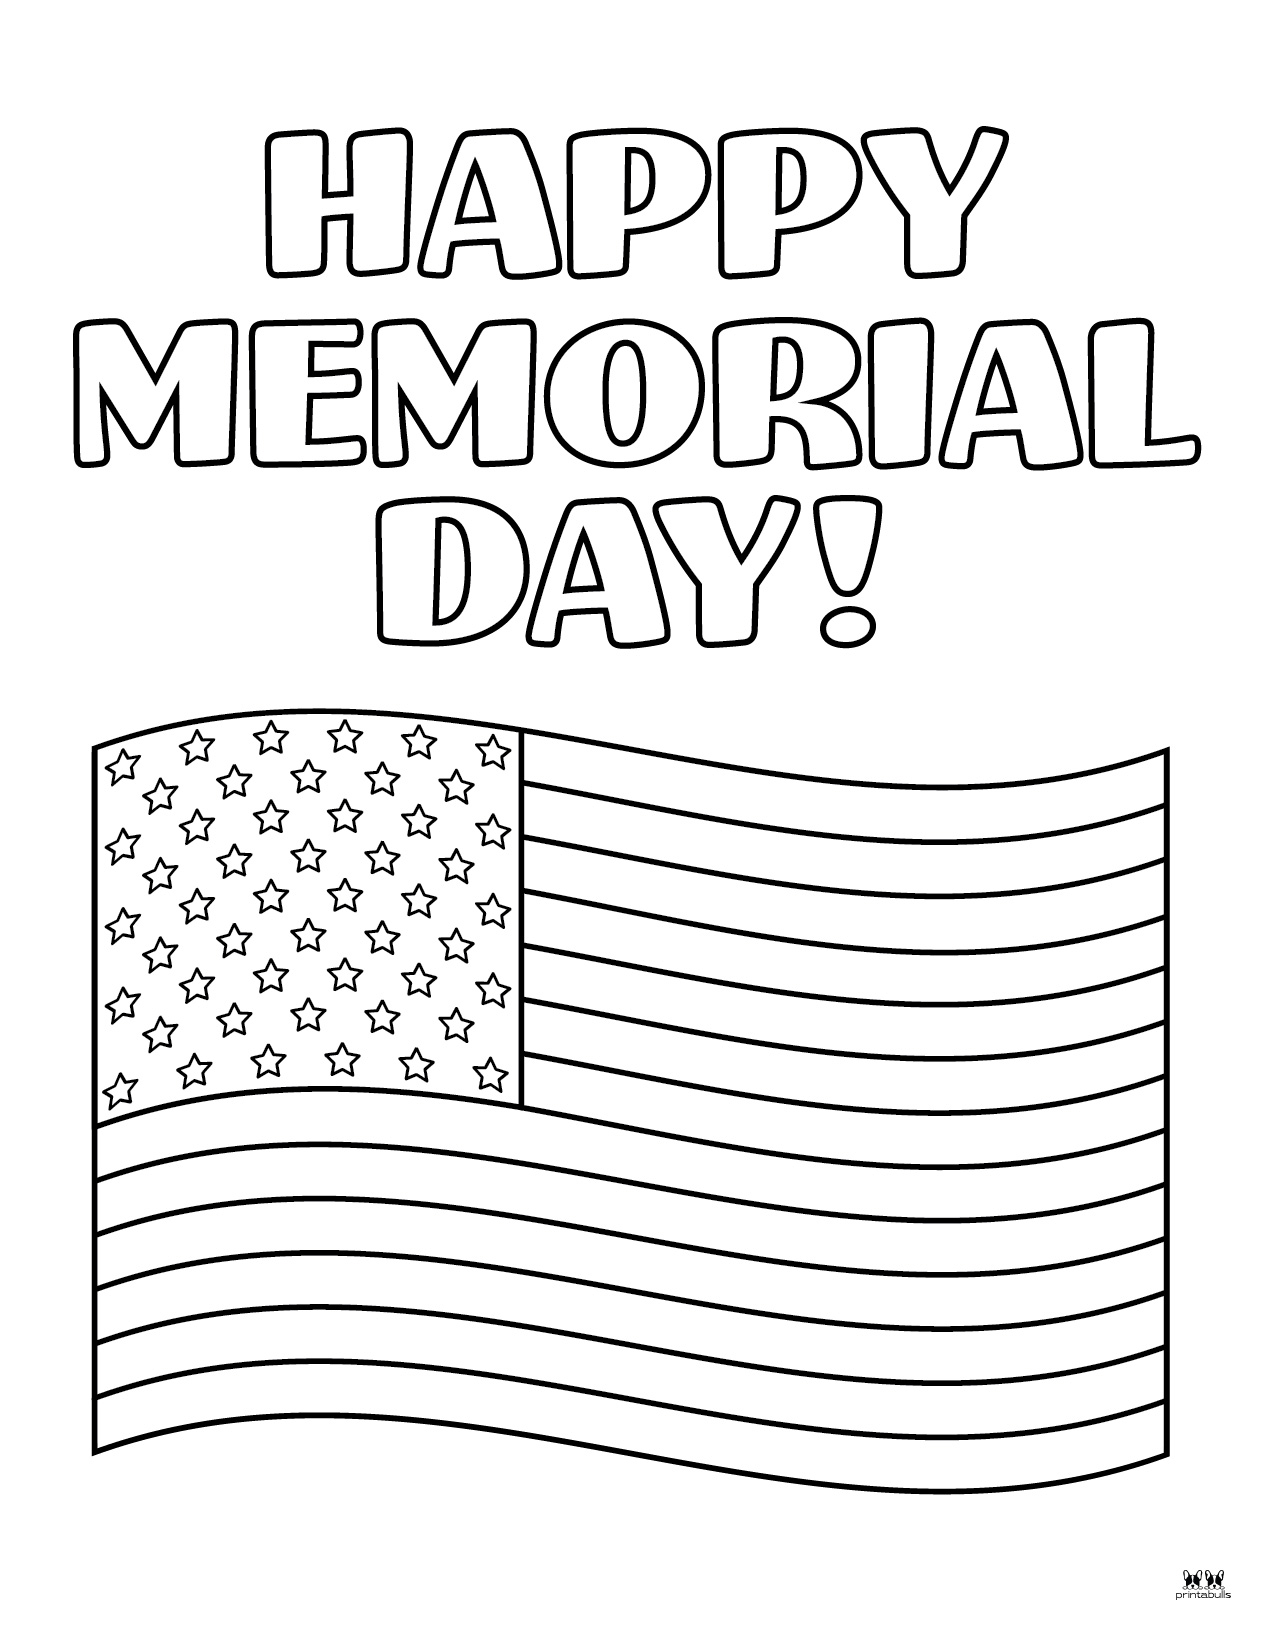 Memorial Day Coloring Pages - 15 FREE Pages | Printabulls